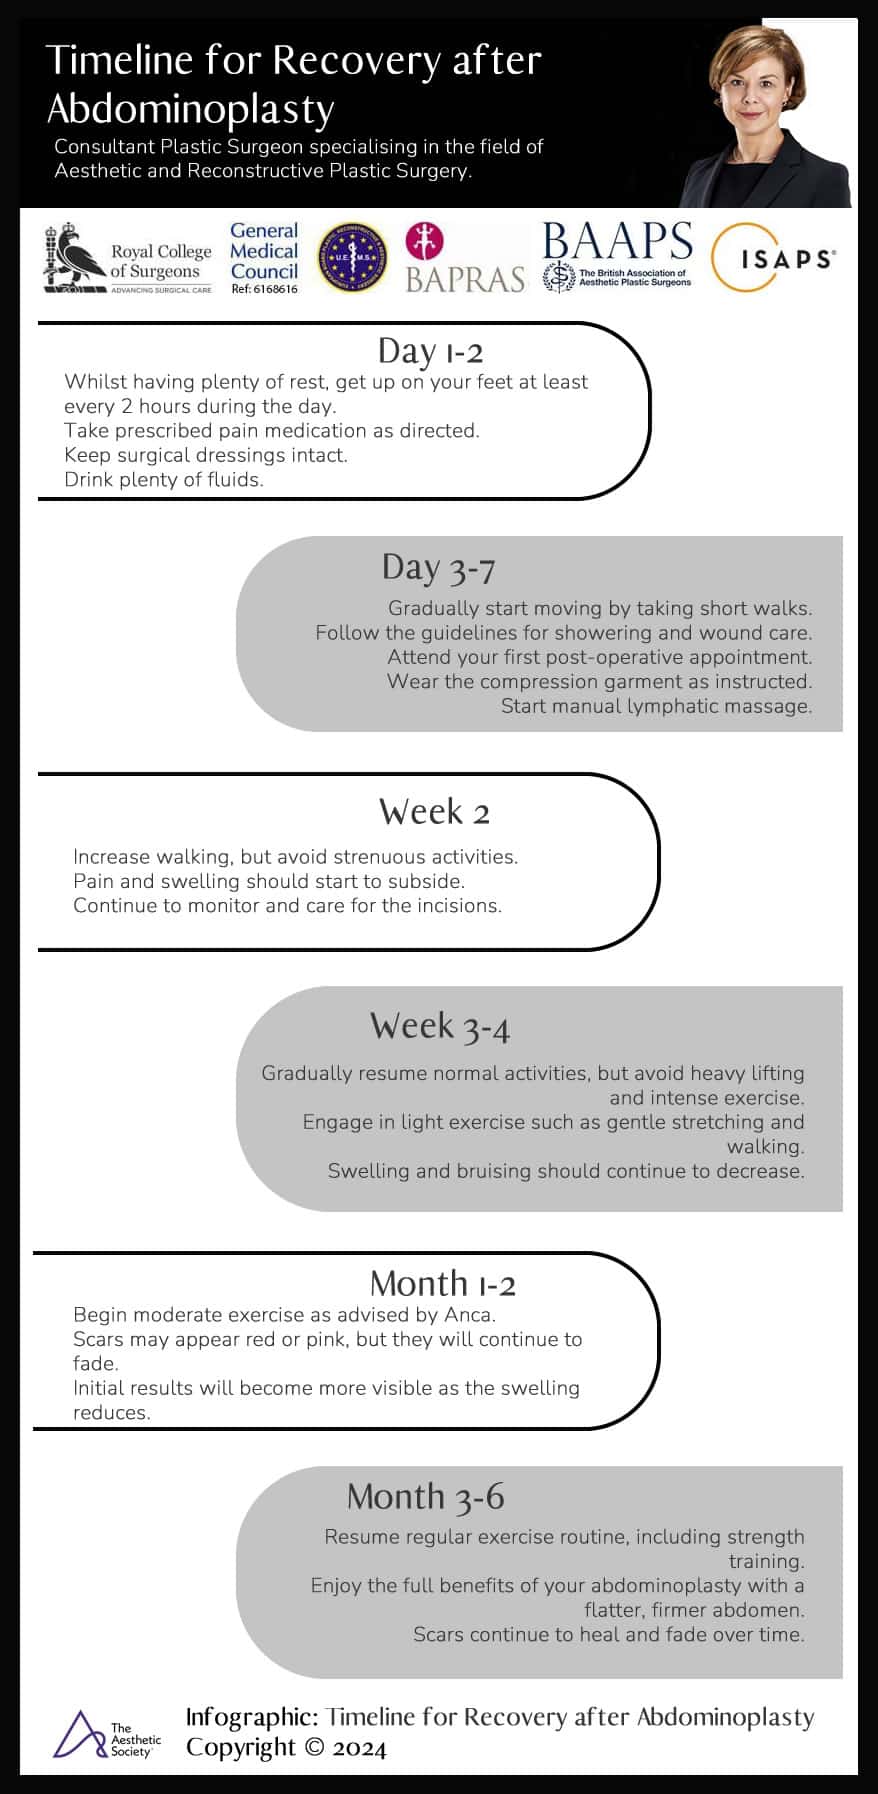 Infografic - Timeline for Recovery after Abdominoplasty